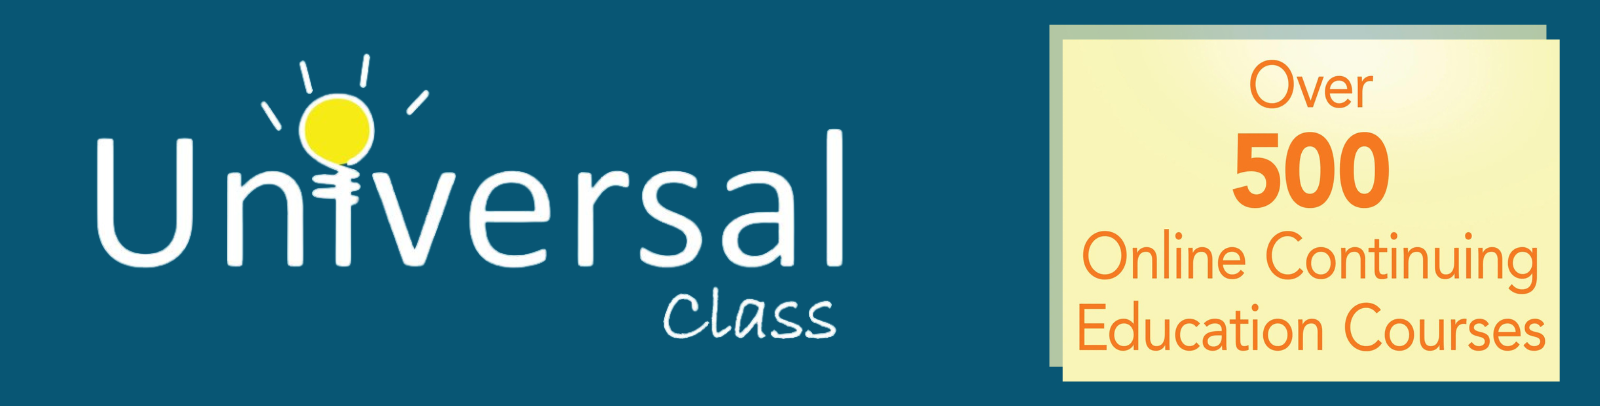 Universal Class logo next to the text 